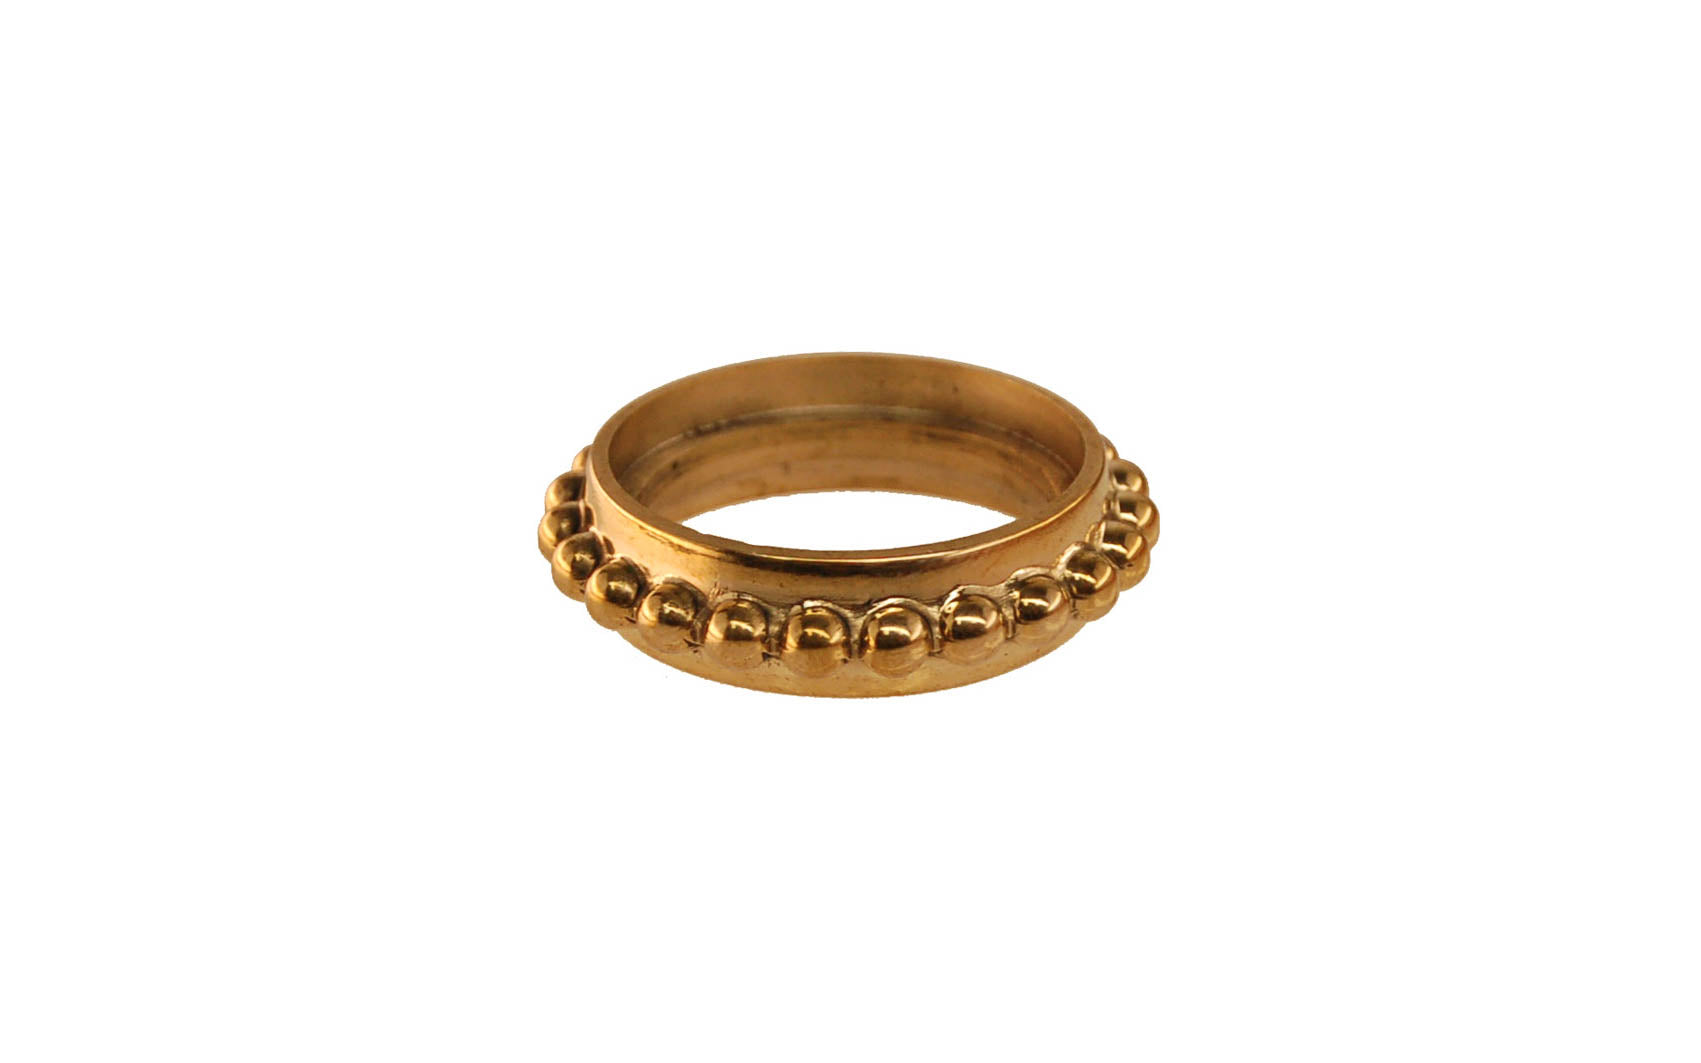 Roman Beaded Ring is handmade of 24ct gold-plated bronze For Sale at  1stDibs | motichur gold ring, motichur ring, motichur anguthi